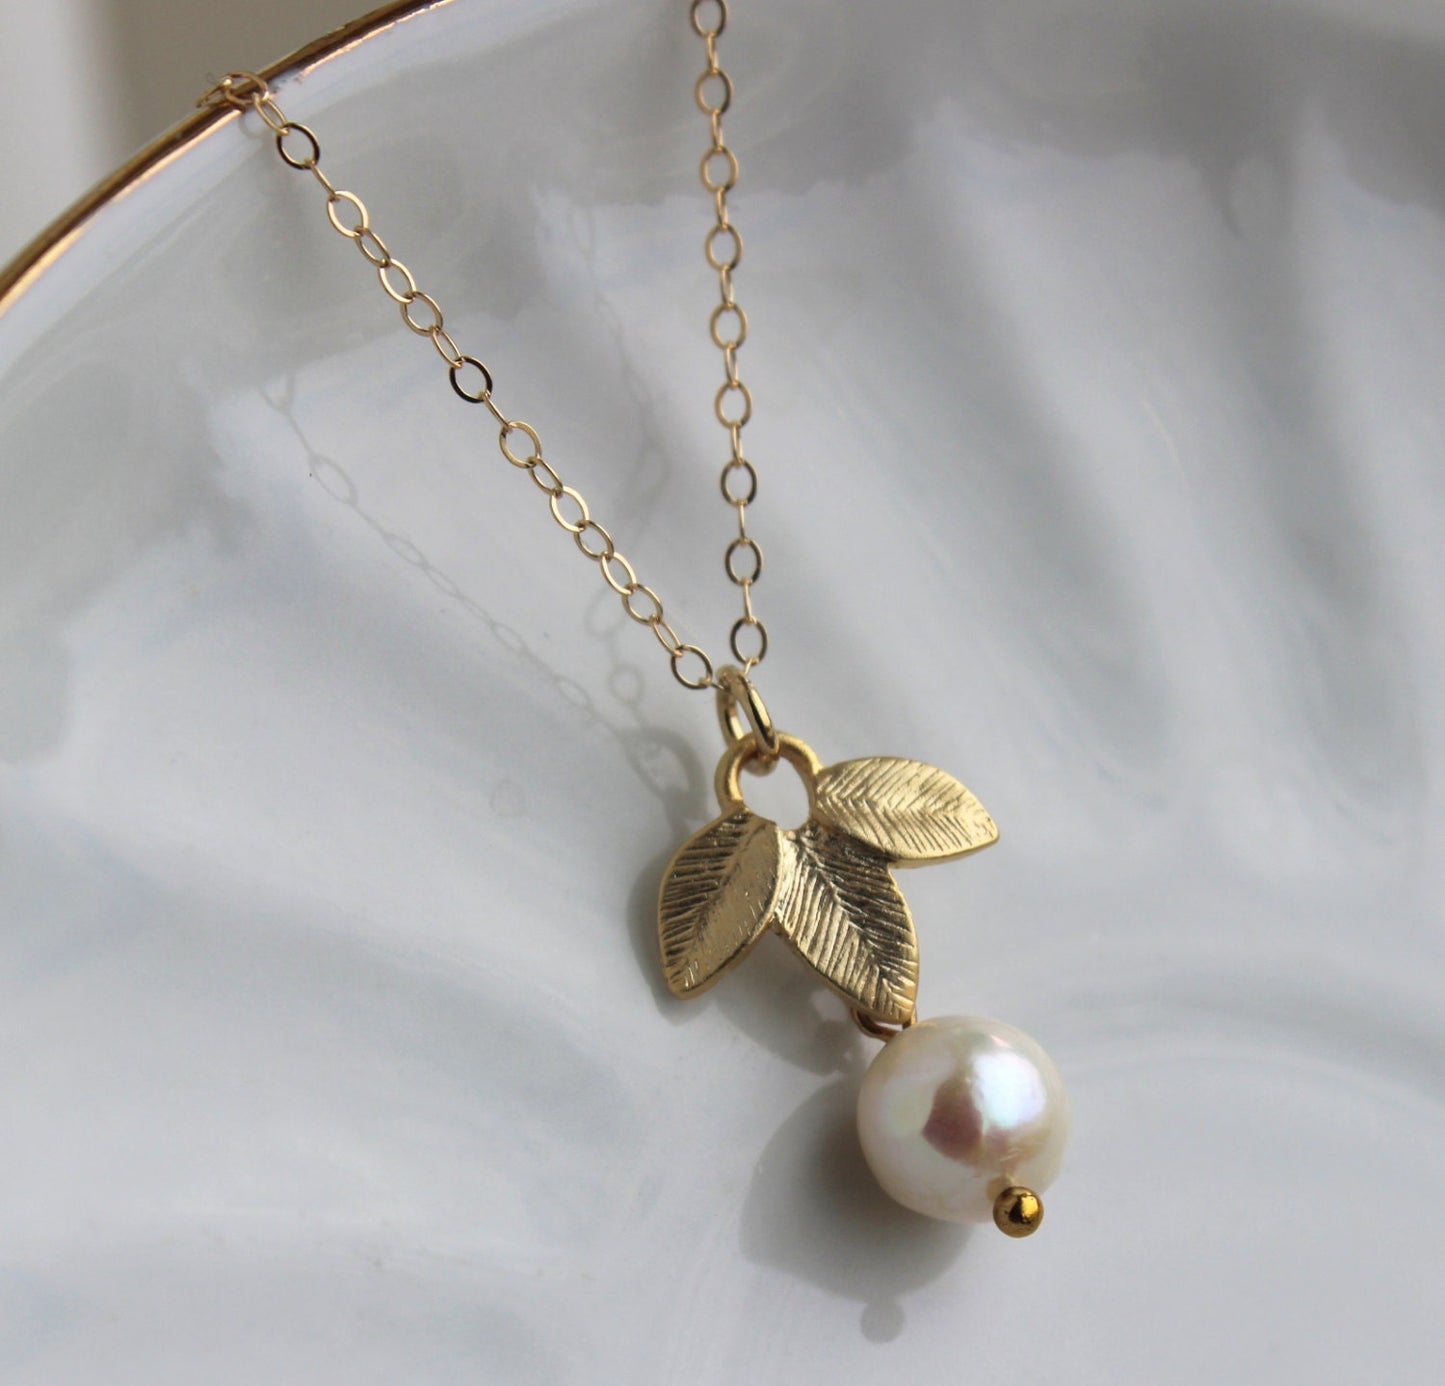 White Freshwater Pearl Necklace Gold Leaf Necklace - Freshwater Pearl Jewelry - Round Pearl Bridesmaid Jewelry - Pearl Bridal Necklace